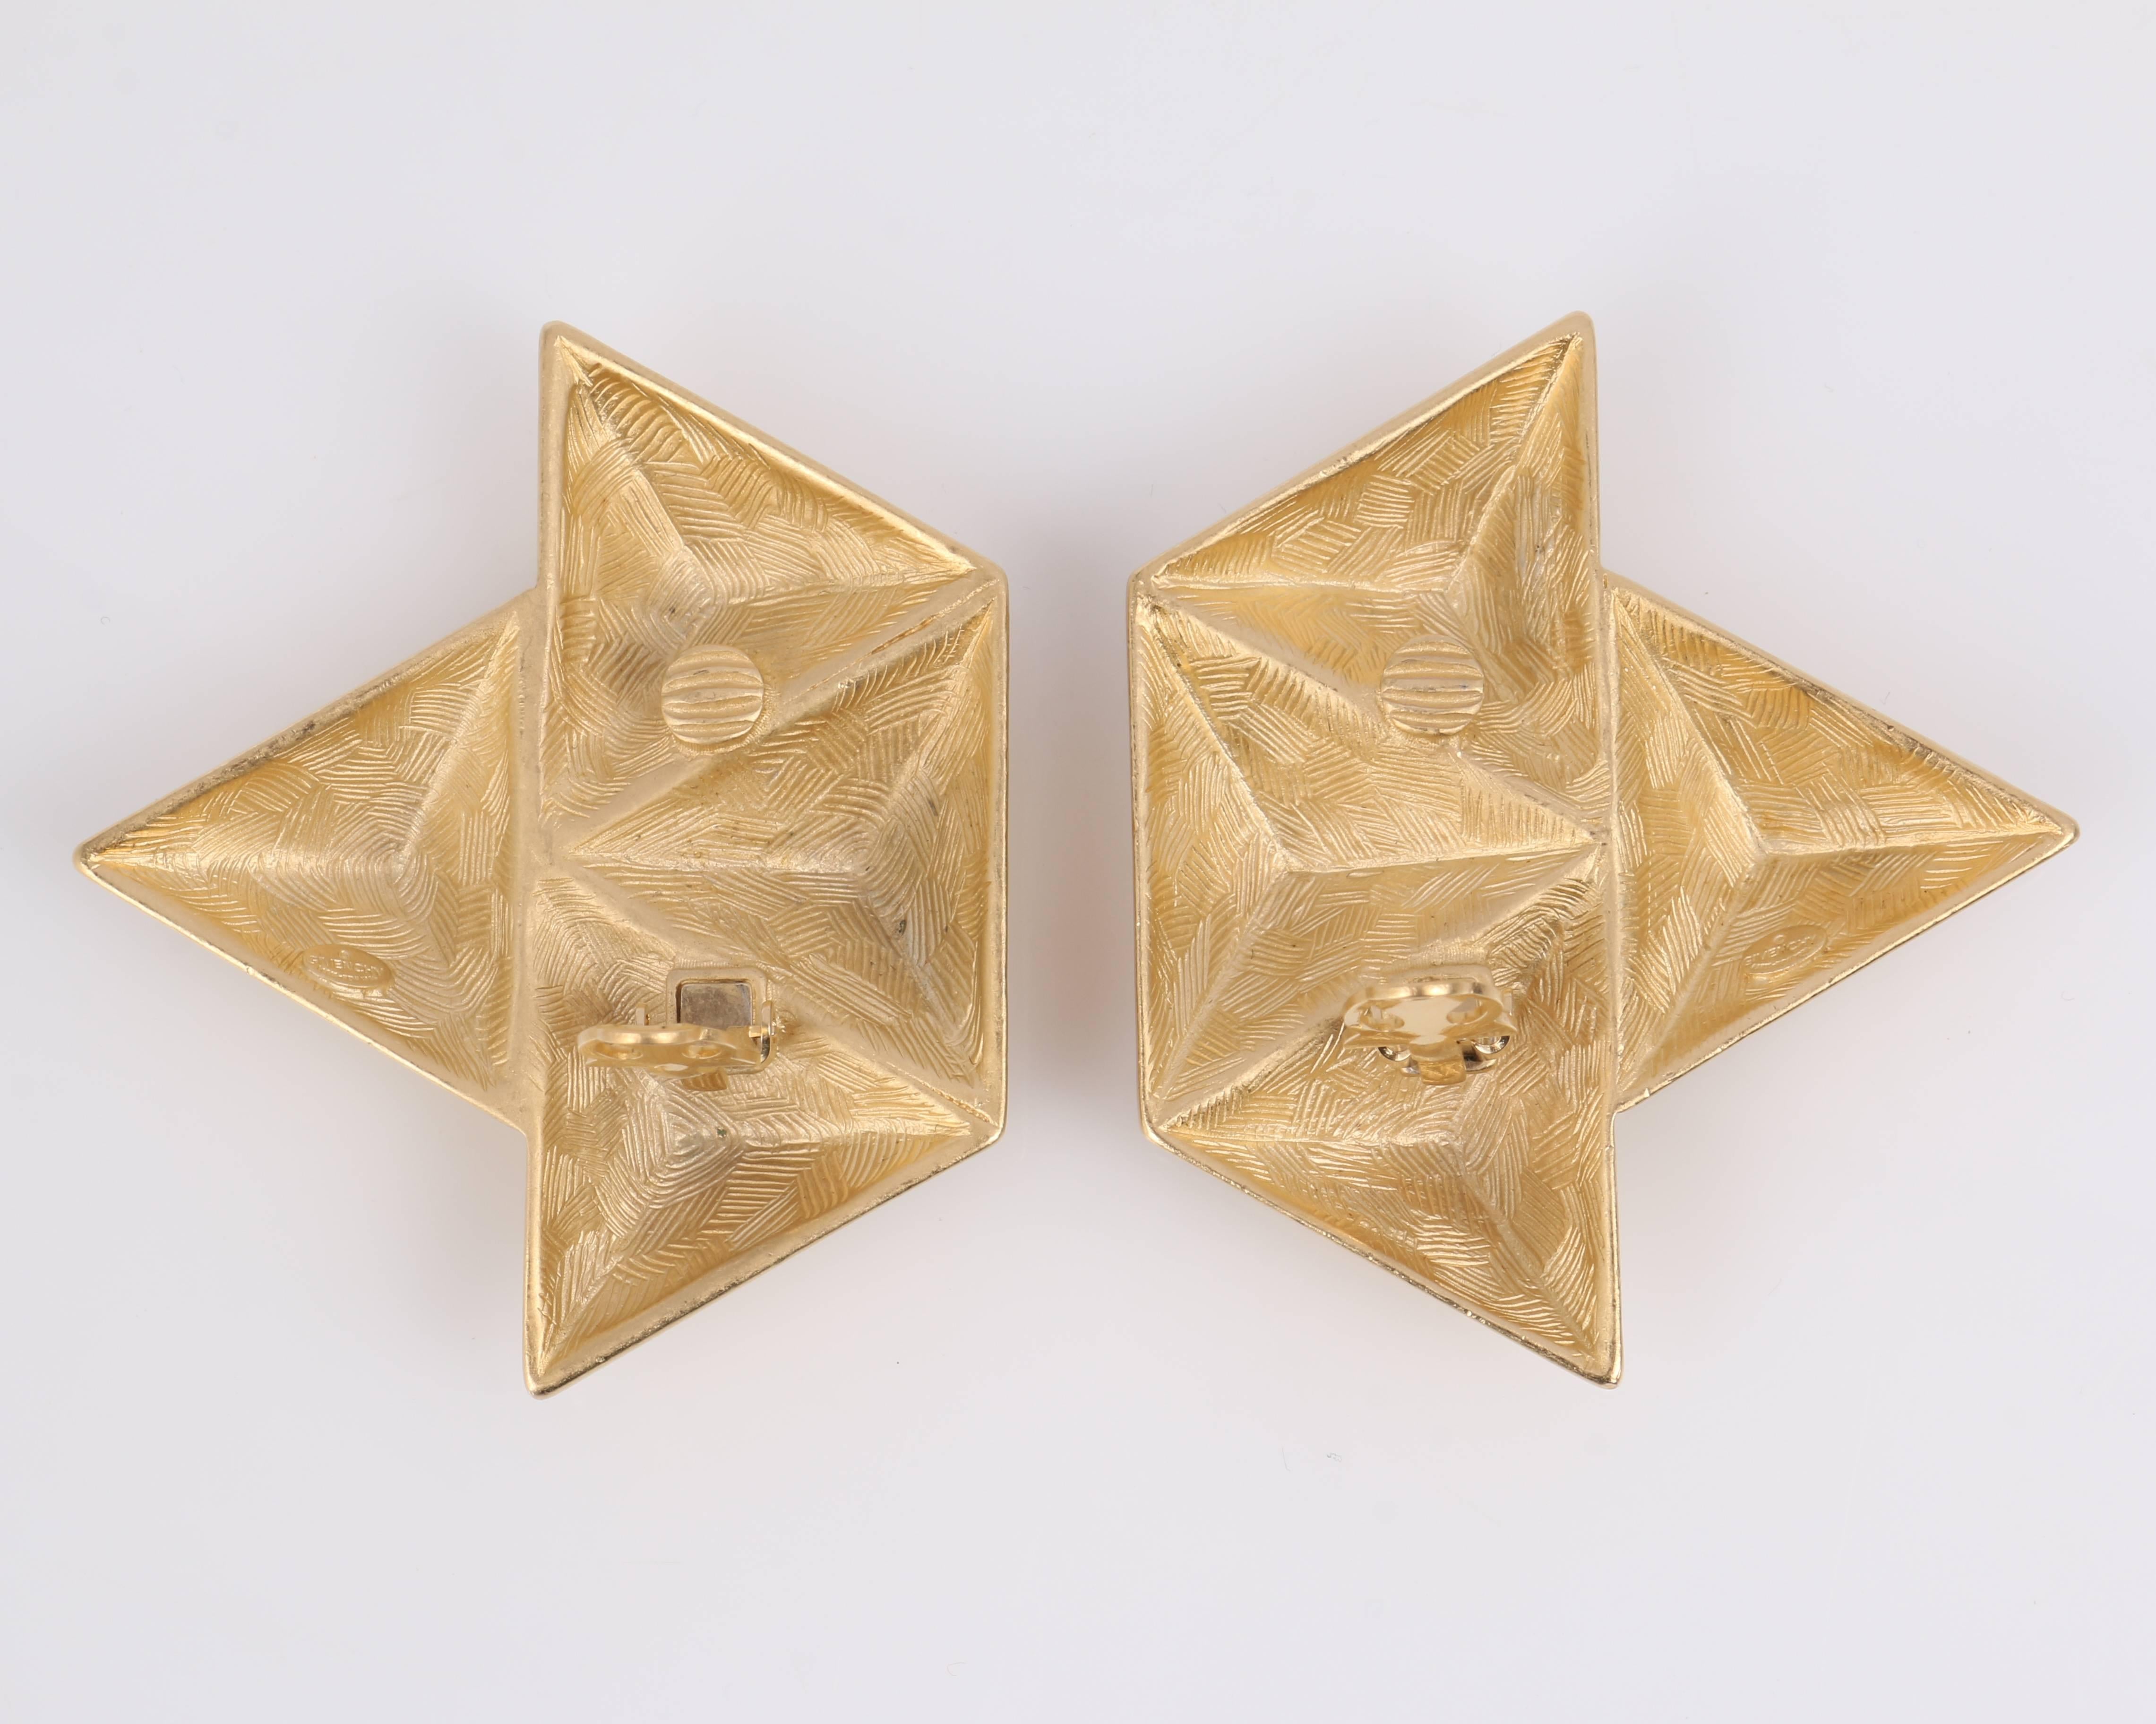 GIVENCHY c.1980's Gold Geometric Rockstud 3D Pyramid Statement Clip Earrings In Good Condition For Sale In Thiensville, WI